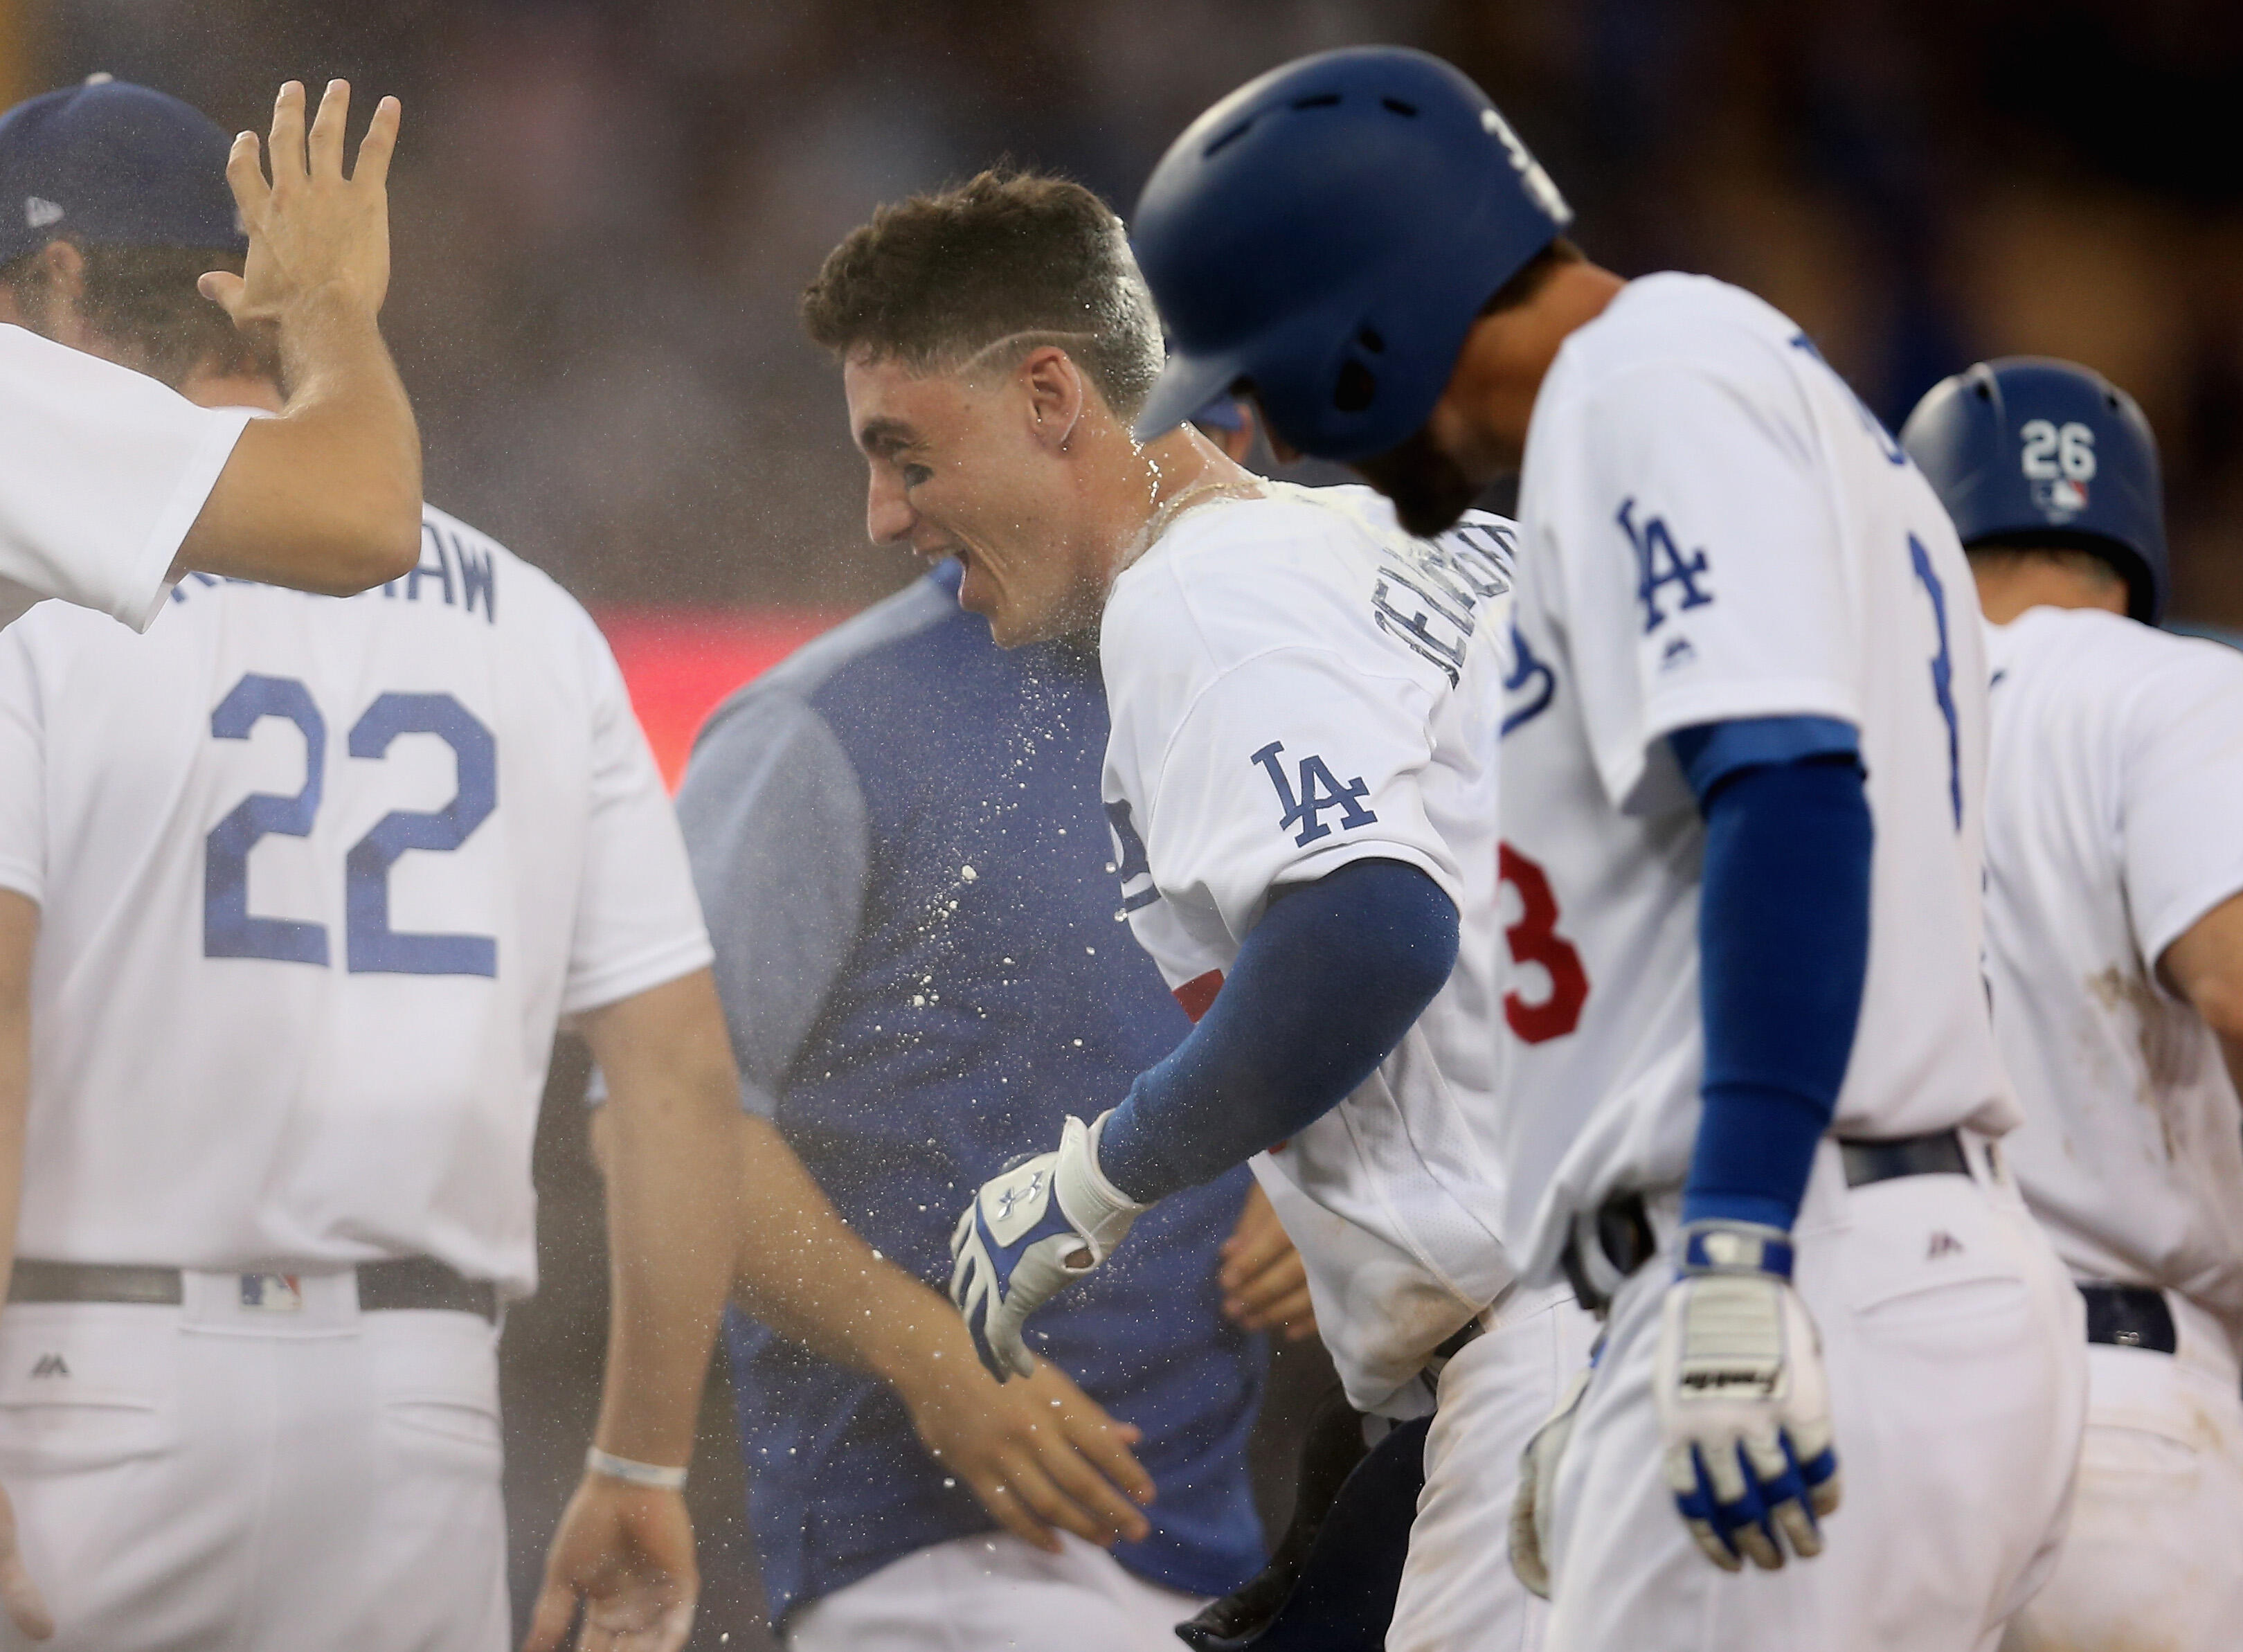 LOS ANGELES, CA - JULY 08:  Cody Bellinger #35 of the Los Angeles Dodgers is mobbed by teammates after drawing a bases loaded walk off walk in the tenth inning against the Kansas City Royals at Dodger Stadium on July 8, 2017 in Los Angeles, California.  T